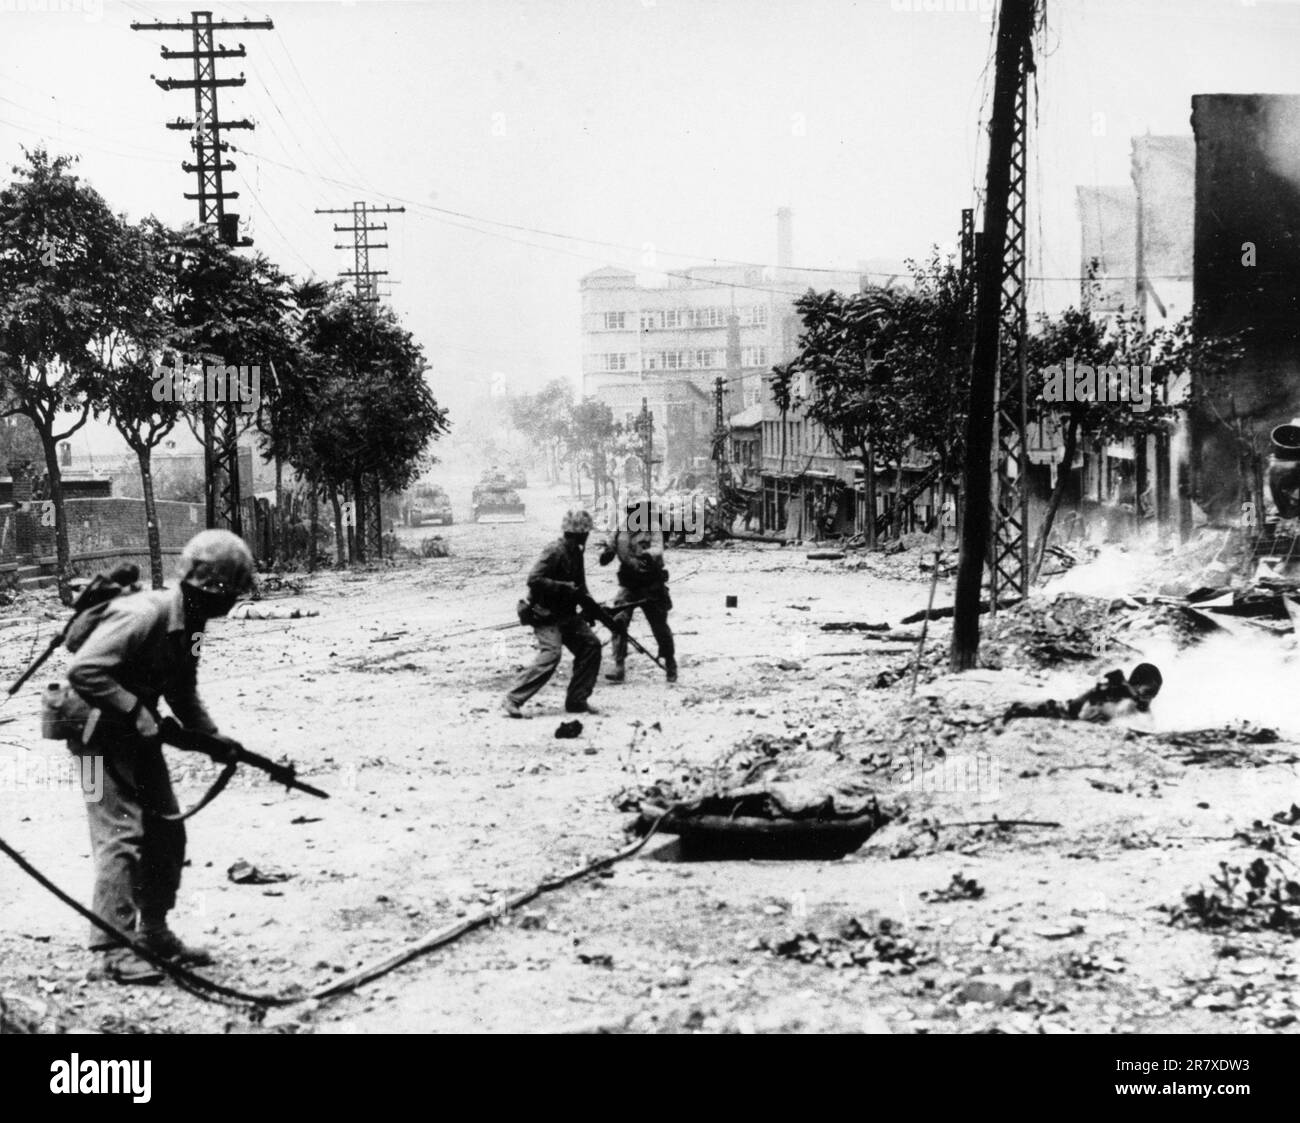 U.S. Marines engaged in street fighting during the liberation of Seoul. Note M-1 rifles and Browning Automatic Rifles carried by the Marines, dead Koreans in the street, and M-4 'Sherman' tanks in the distance. Stock Photo